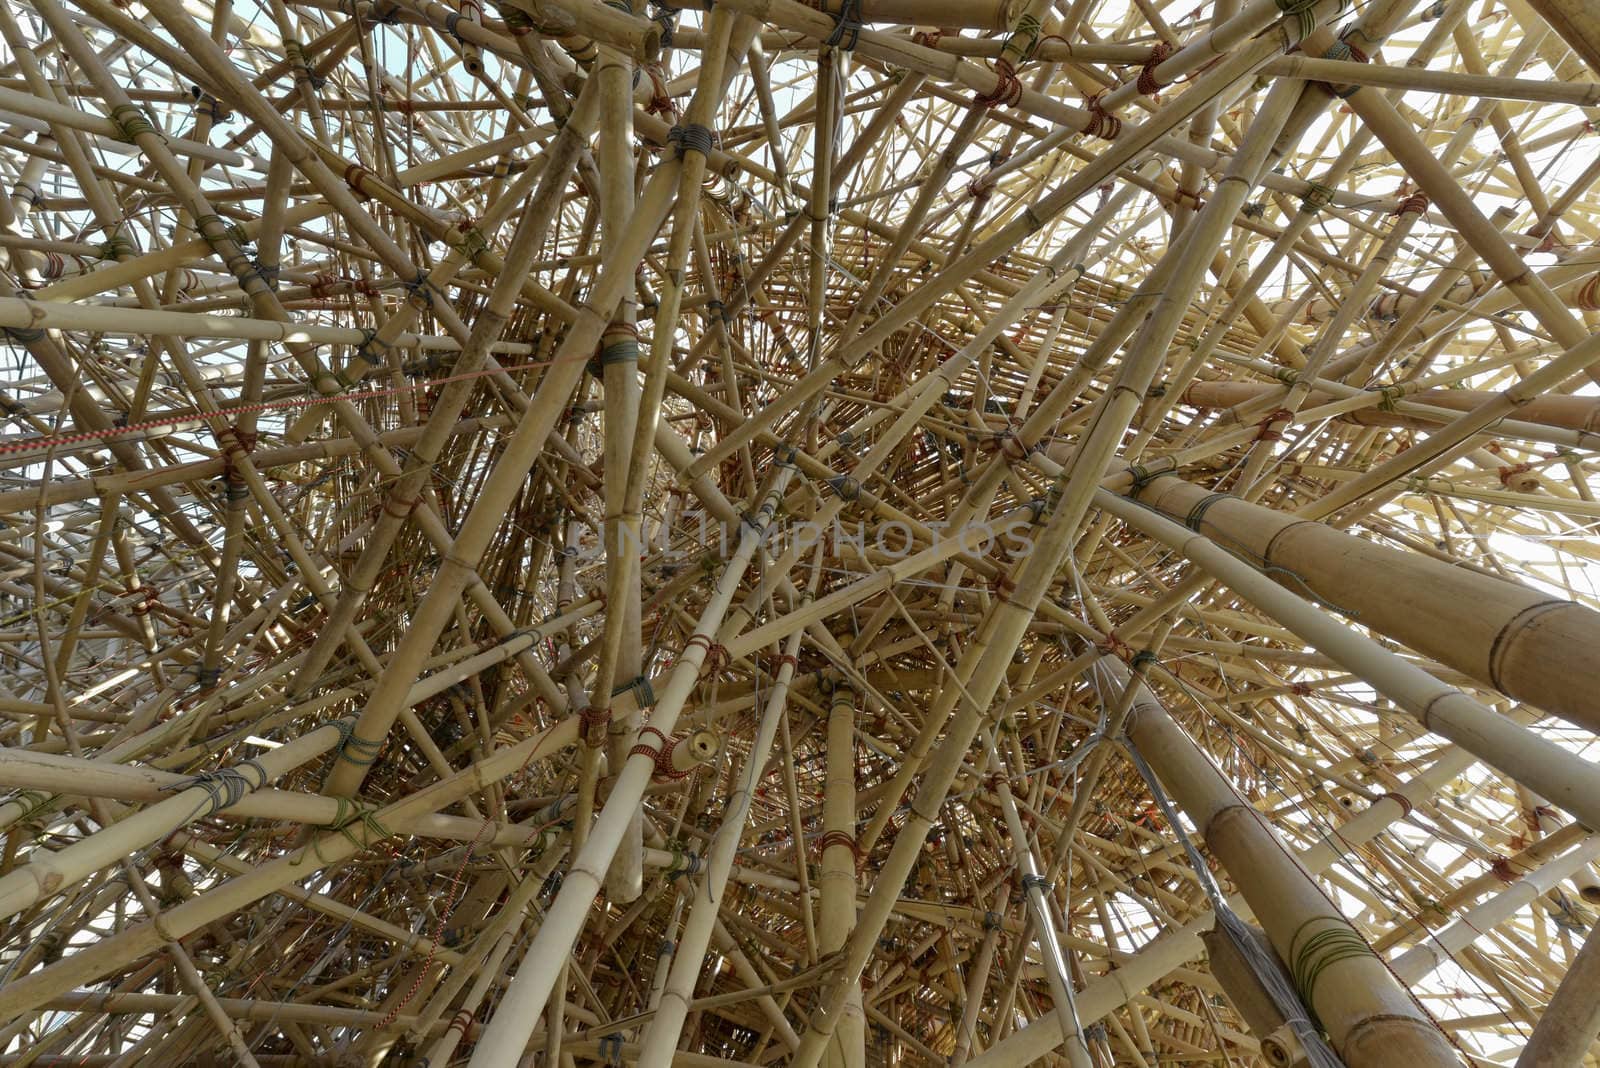 interweaving of bamboo canes by lillo